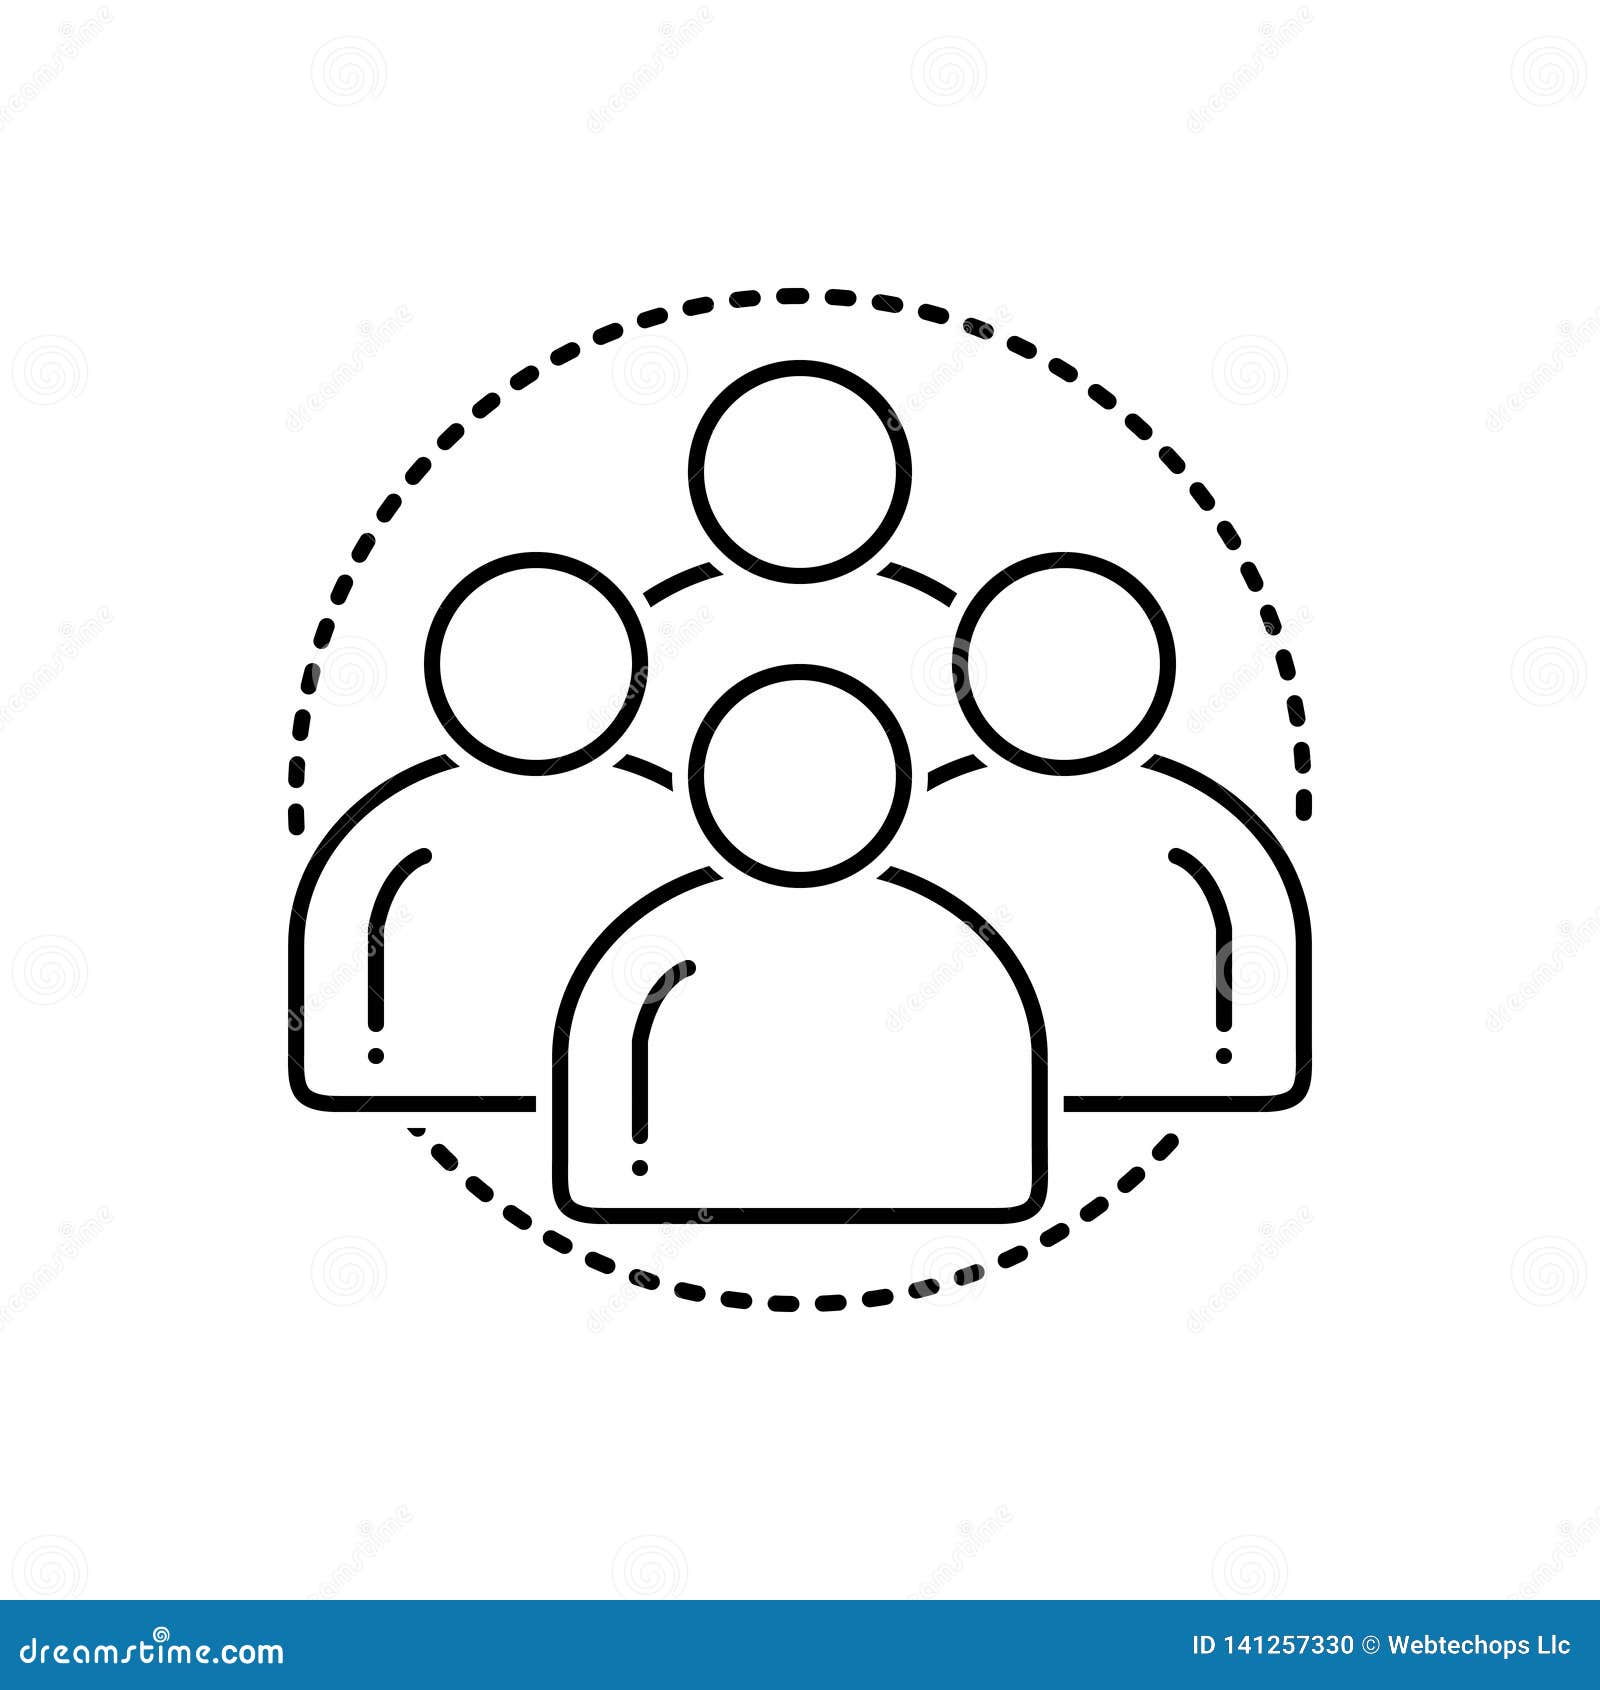 black line icon for personas, man and team